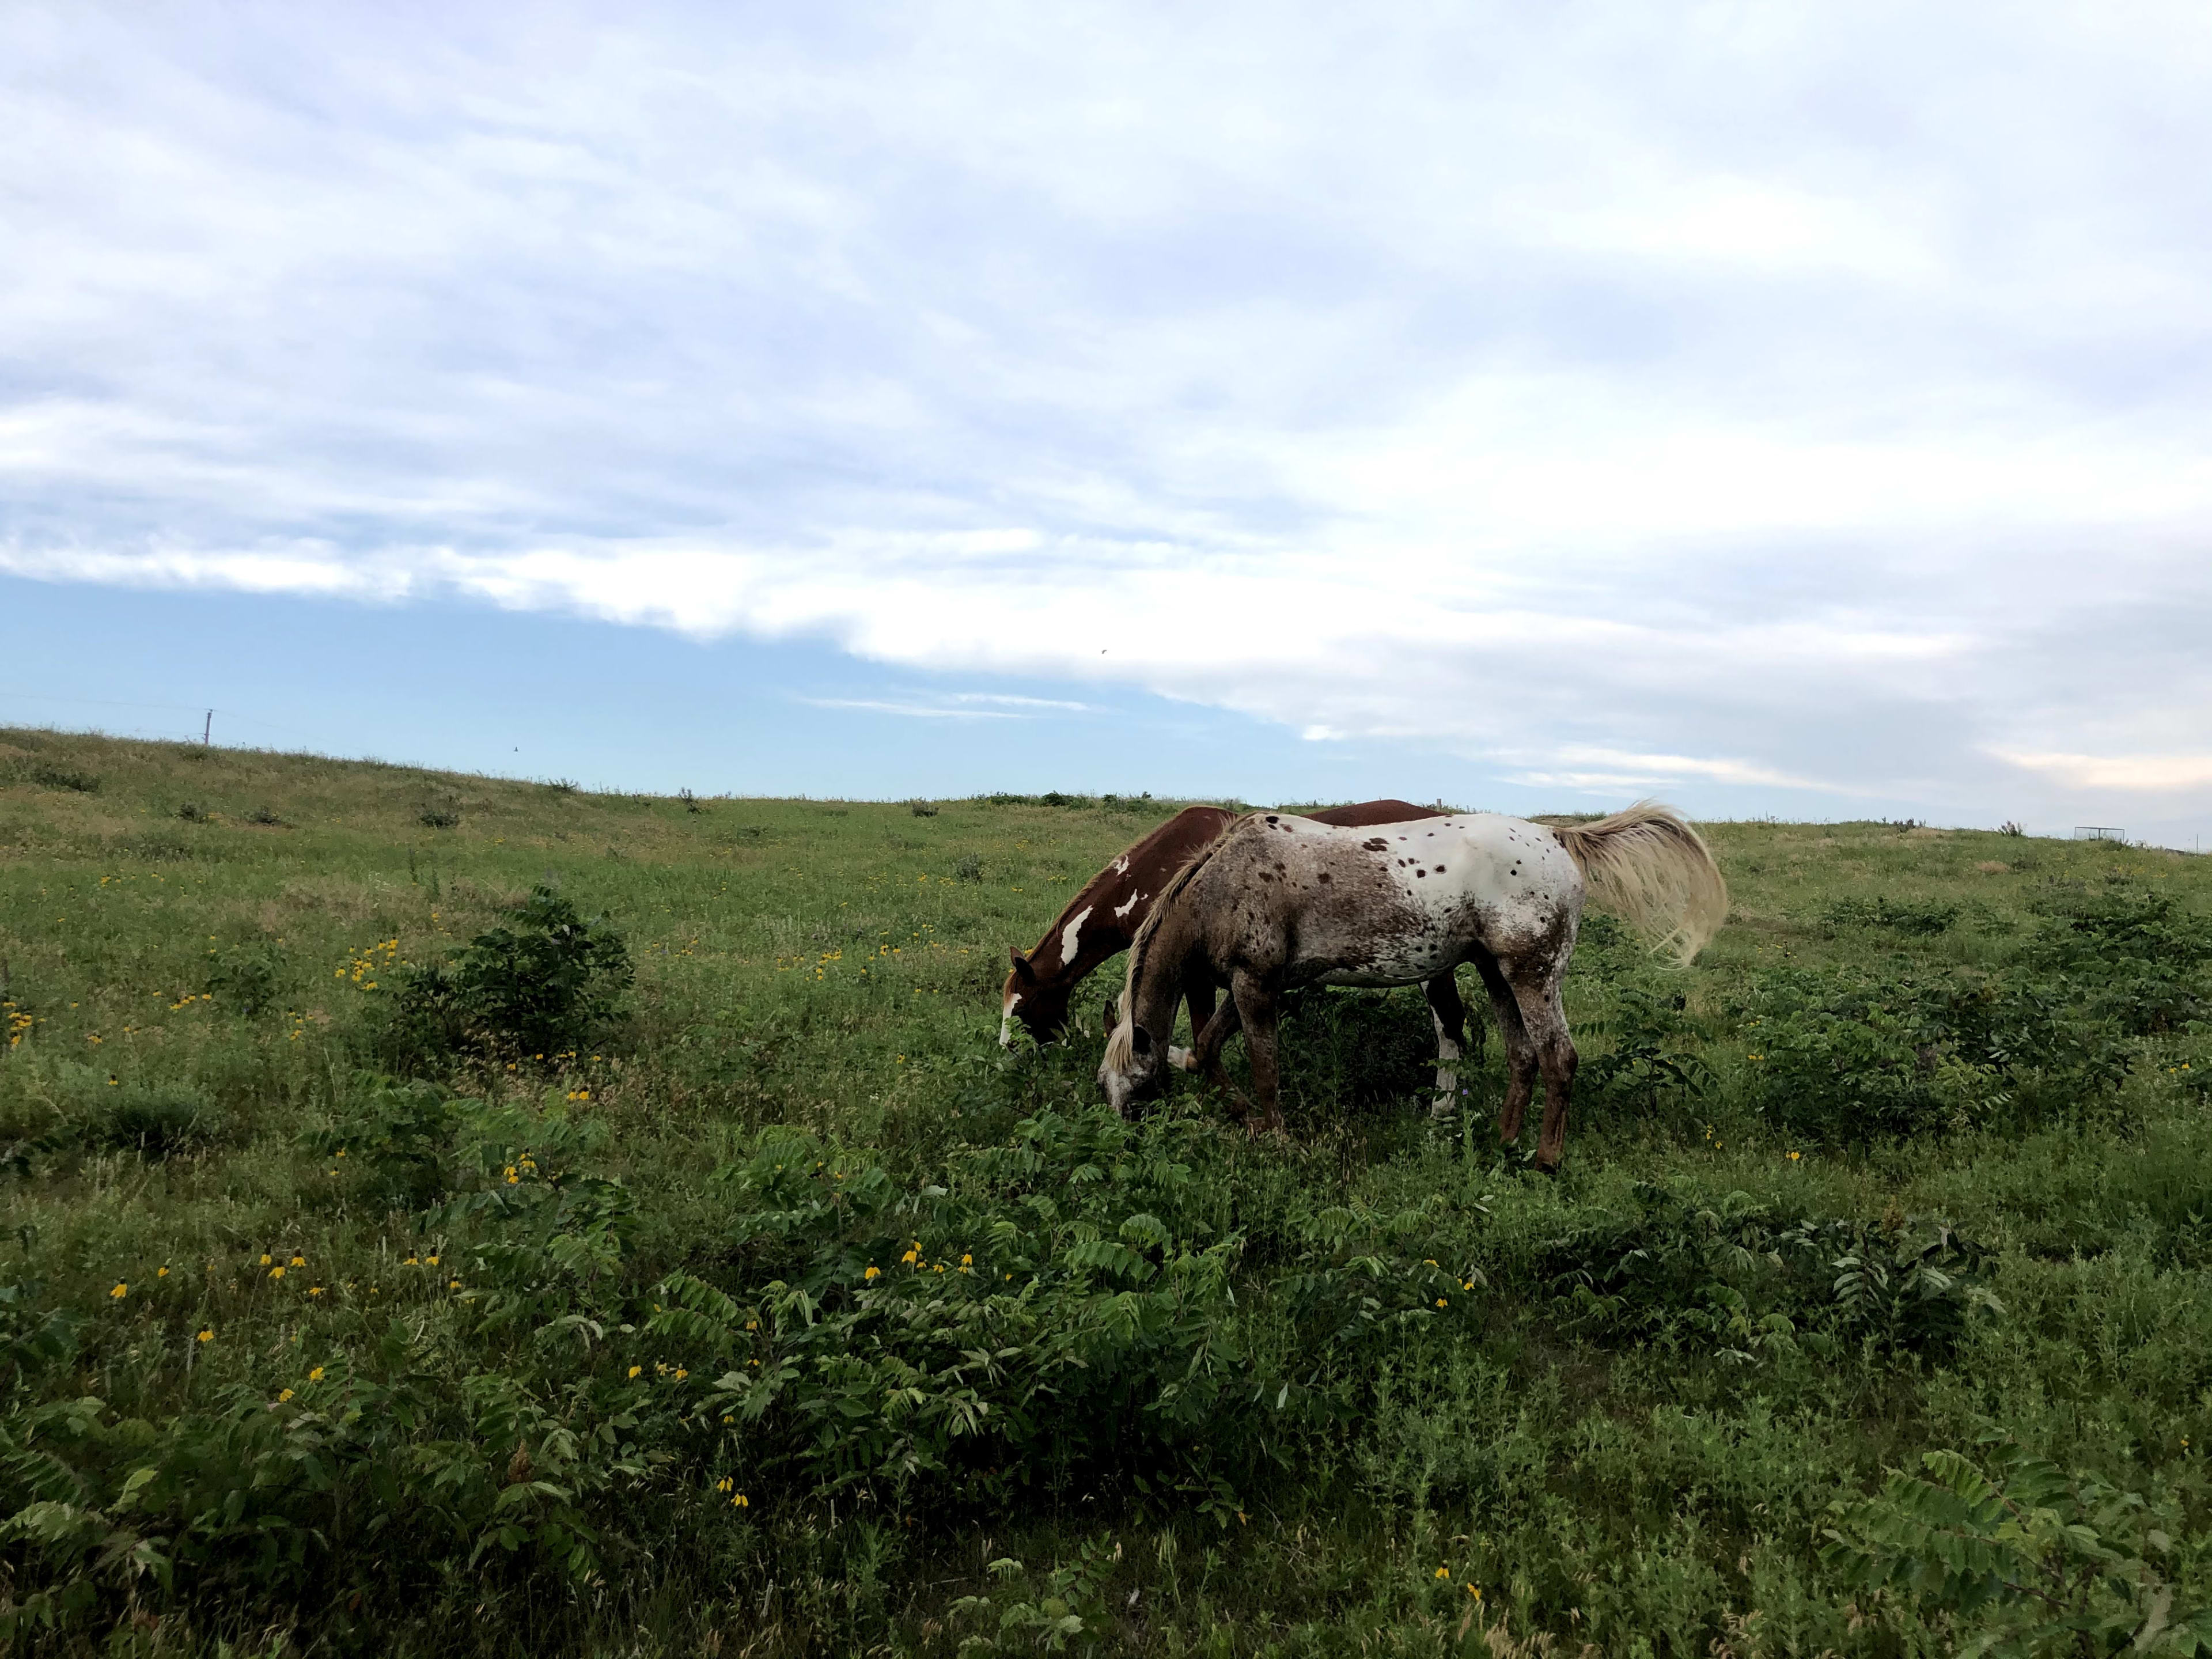 We have 10 acres of prairie land available for camping, you might even run into some of our horses and other wild life